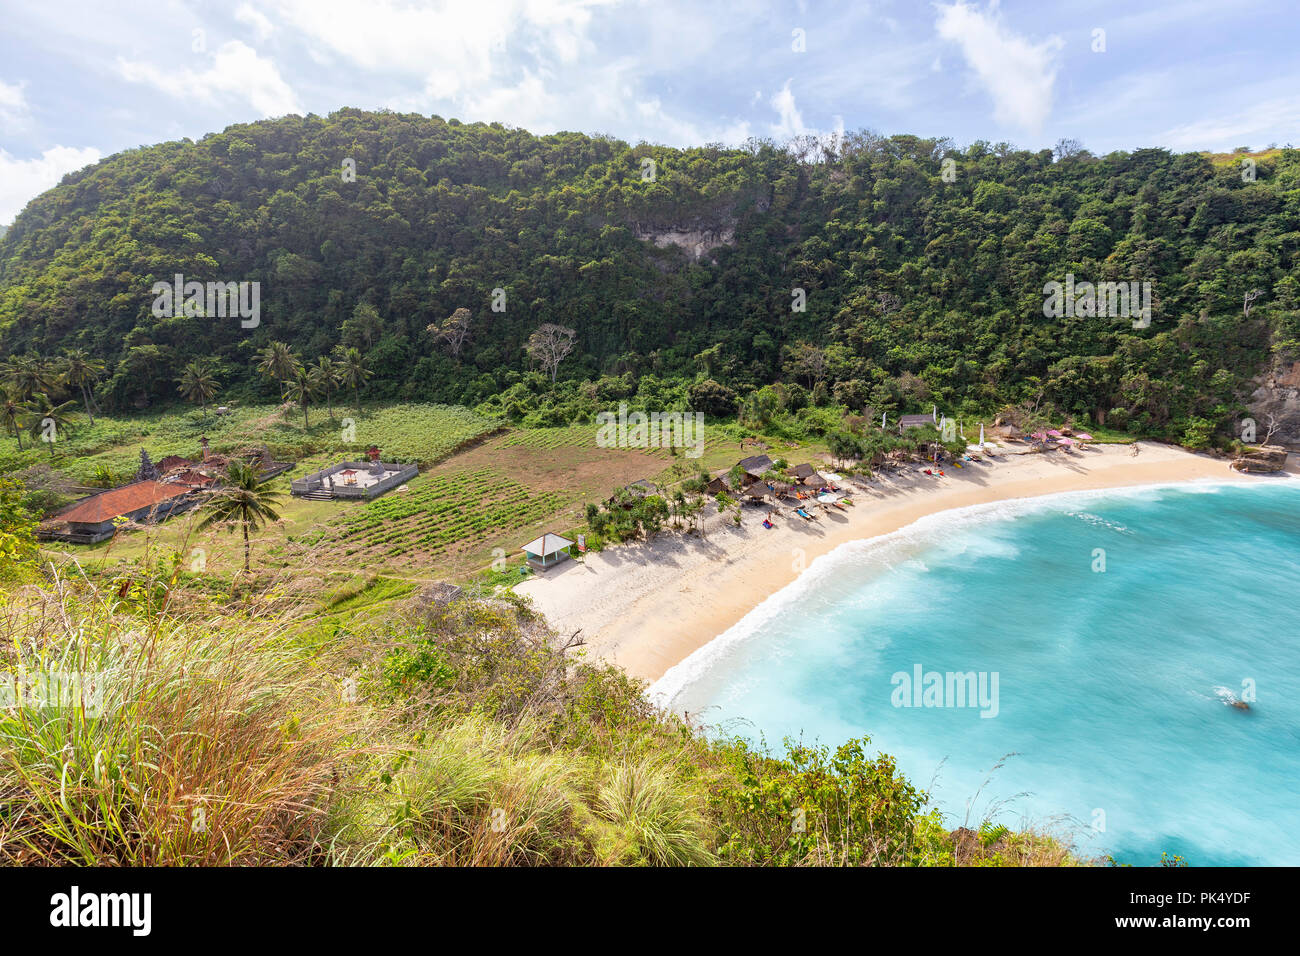 Atuh Beach as well as farm land and a Hindu temple behind it on Nusa Penida, Indonesia. Stock Photo